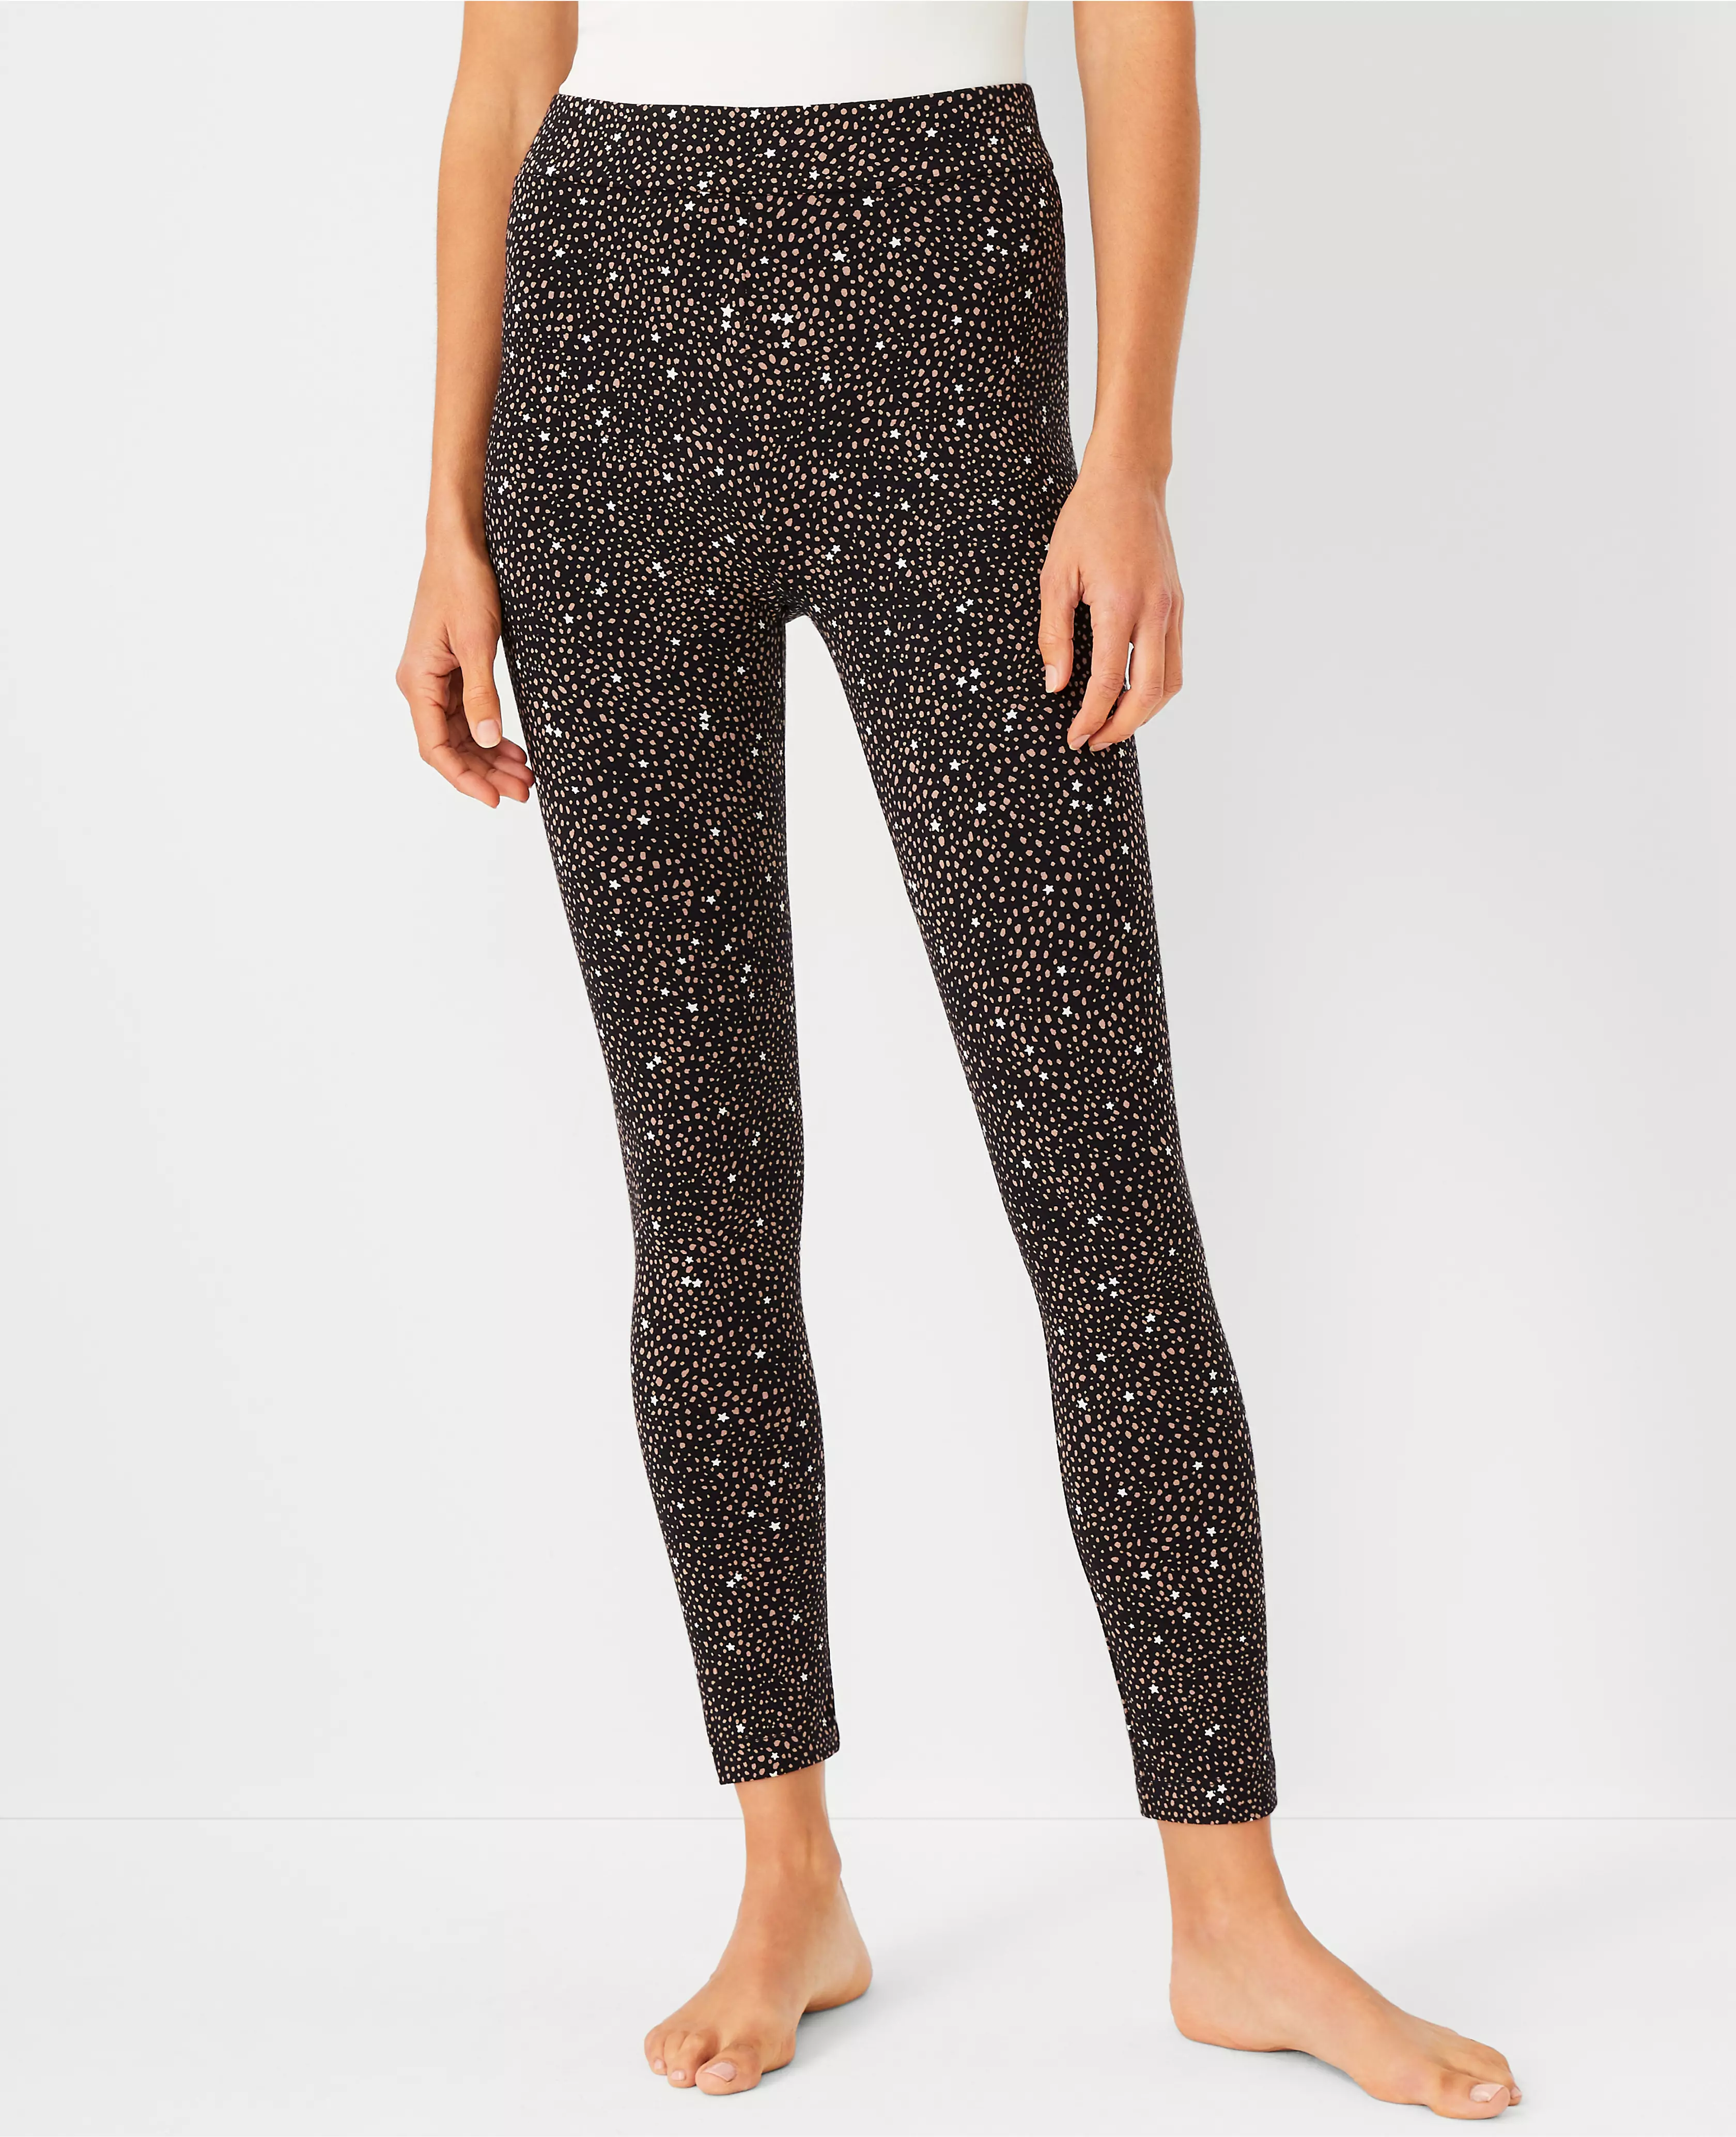 Starry Spotted Essential Leggings